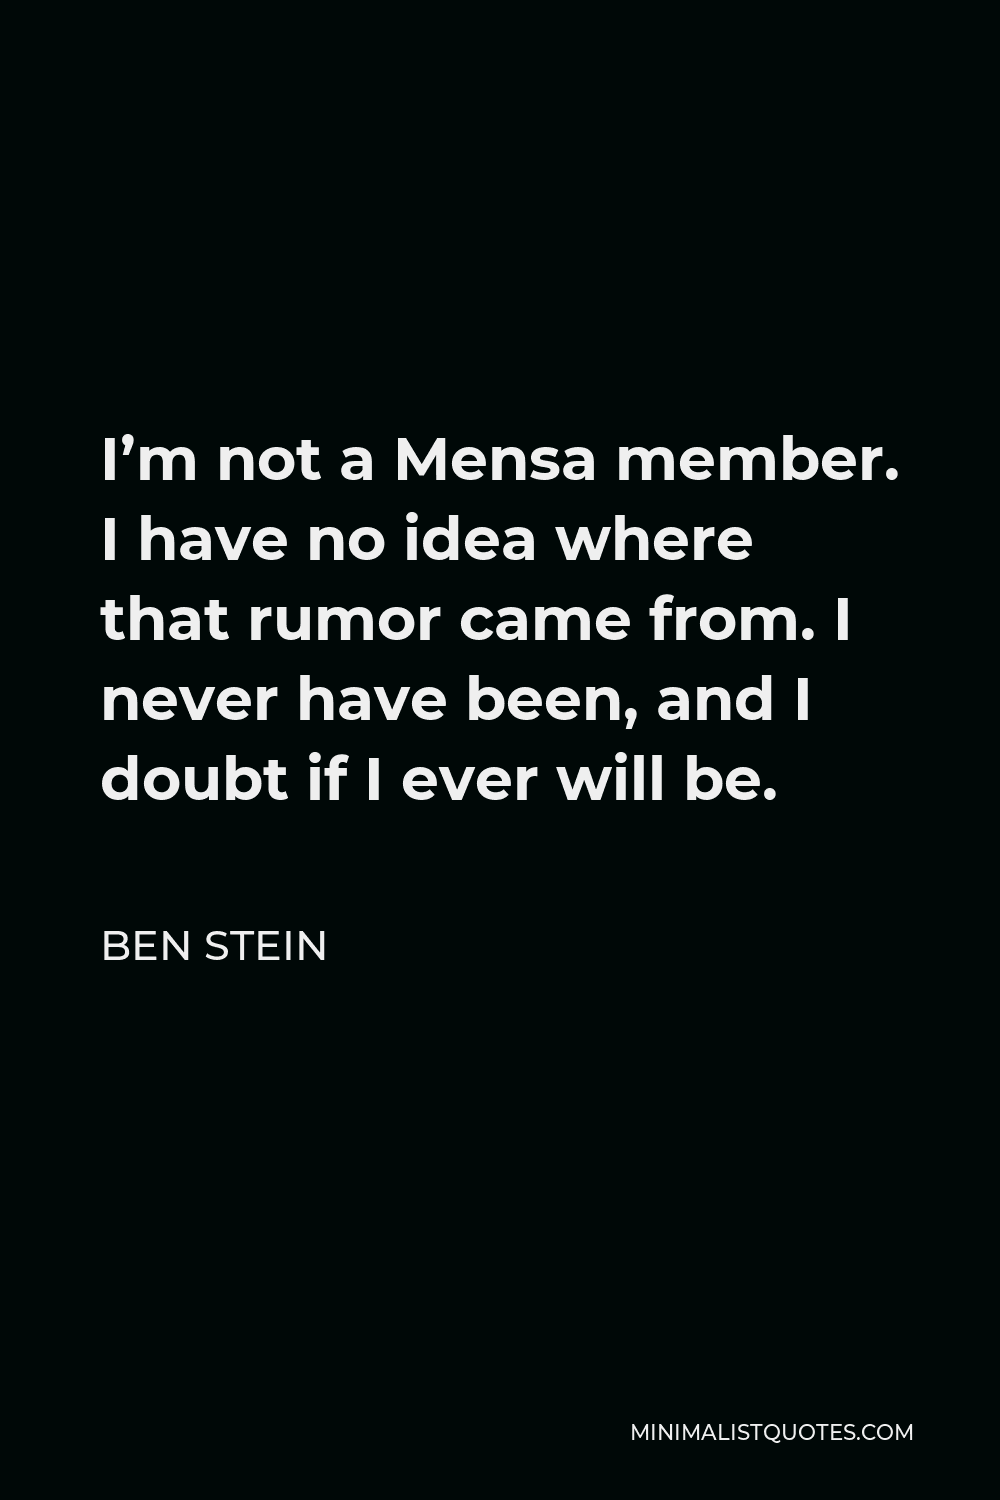 Ben Stein Quote - I’m not a Mensa member. I have no idea where that rumor came from. I never have been, and I doubt if I ever will be.